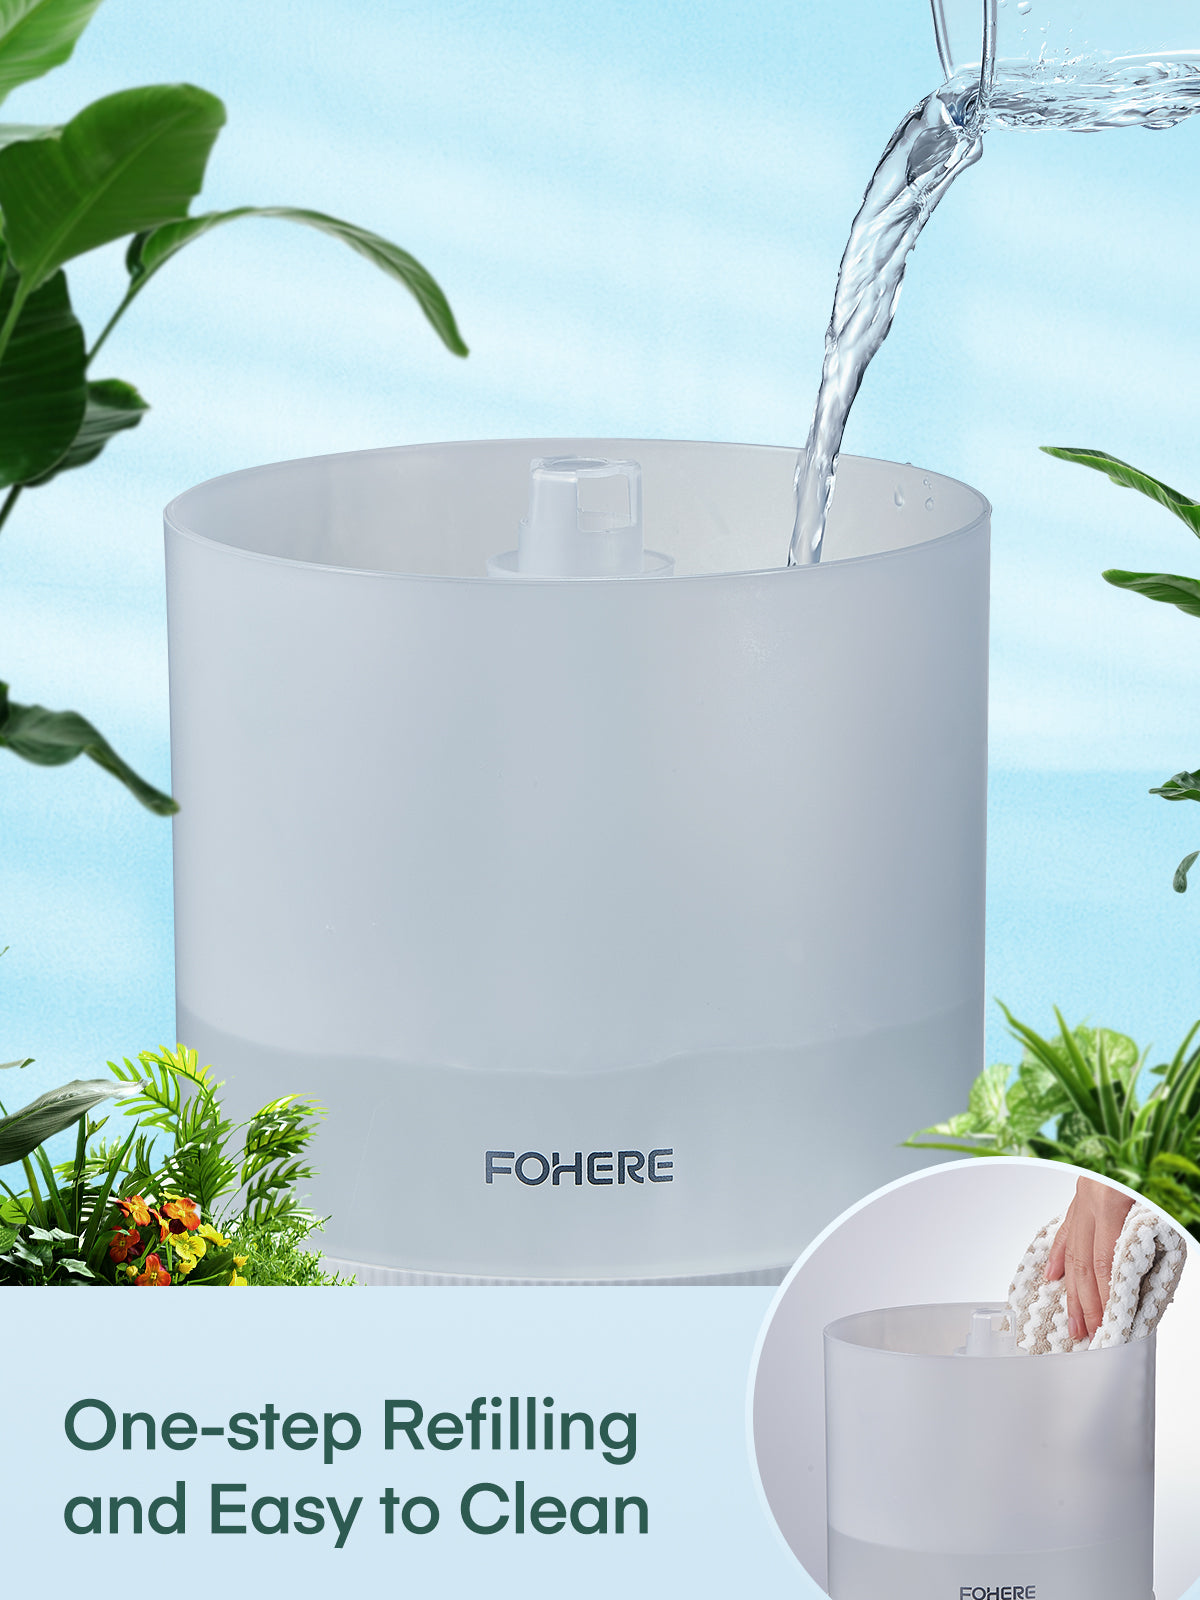 FOHERE Humidifiers for Bedroom, 3.2L Top Fill Cool Mist Ultrasonic Humidifier for Baby Rooms and Plants, 2-IN-1 Essential Oil Diffuser with 7-color Light and Auto Shut-off, BPA-Free, Quiet, White